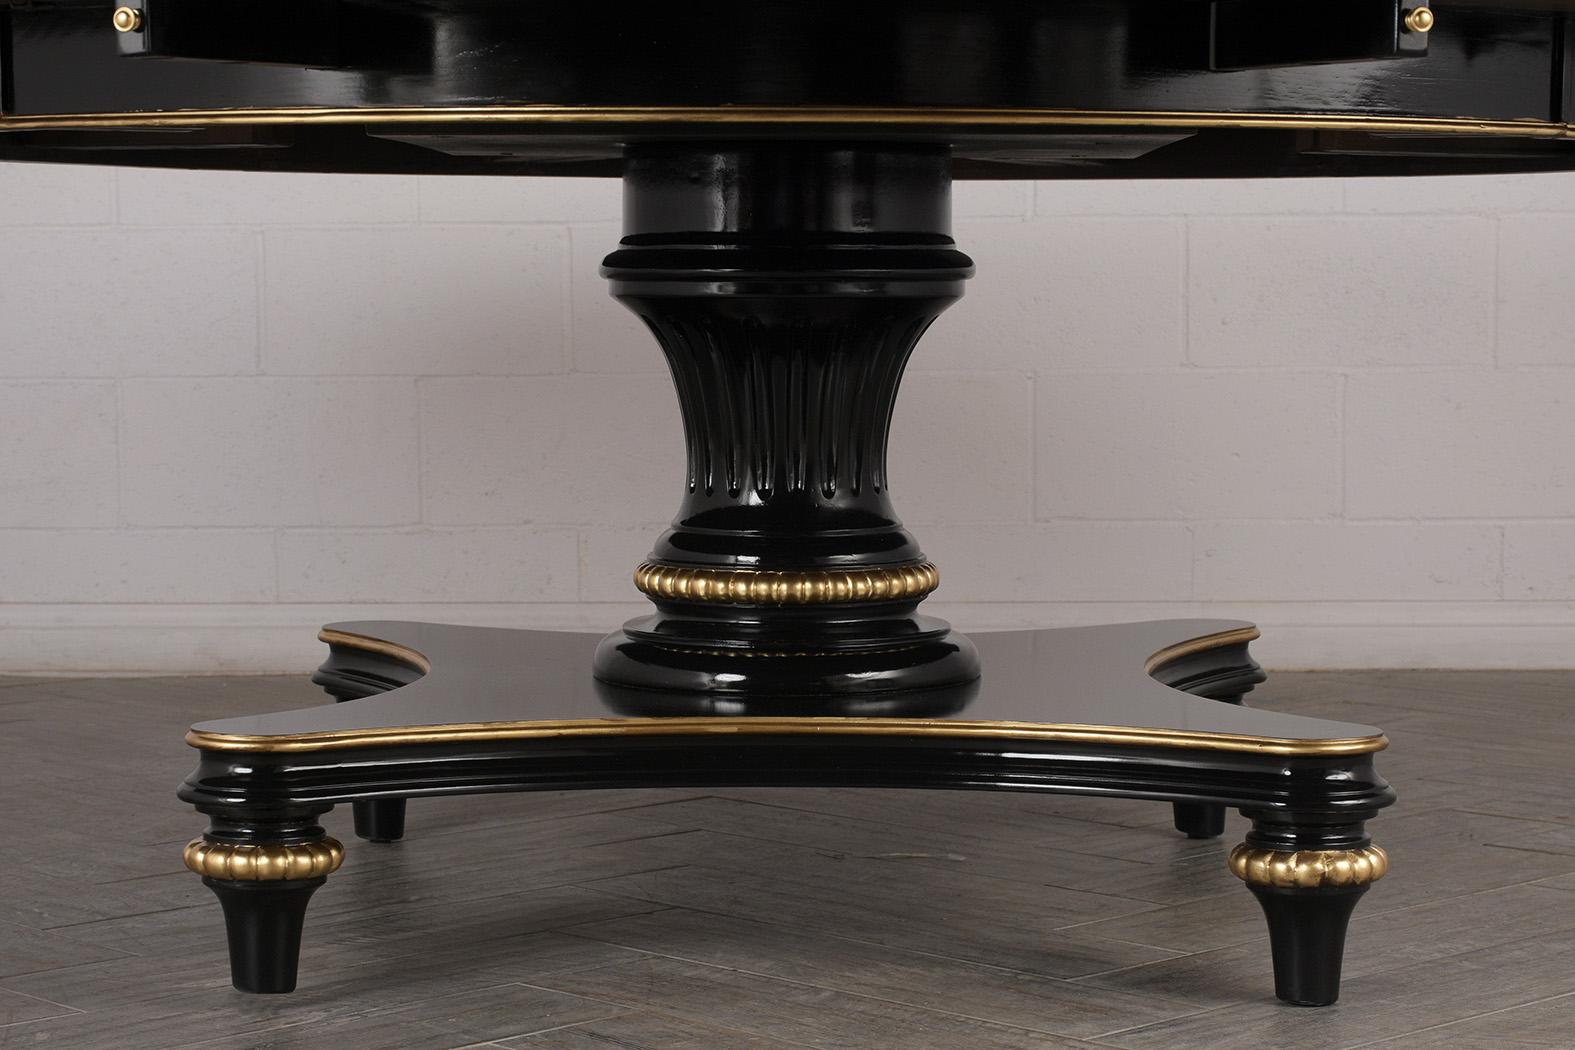 Elegant rounds dining table with extensions. The table is made from solid mahogany wood, newly lacquered finish with gilt details around the top trim and skirt. Followed by carved pedestal legs with gilt trims. Dining Table features 8 arms that pull